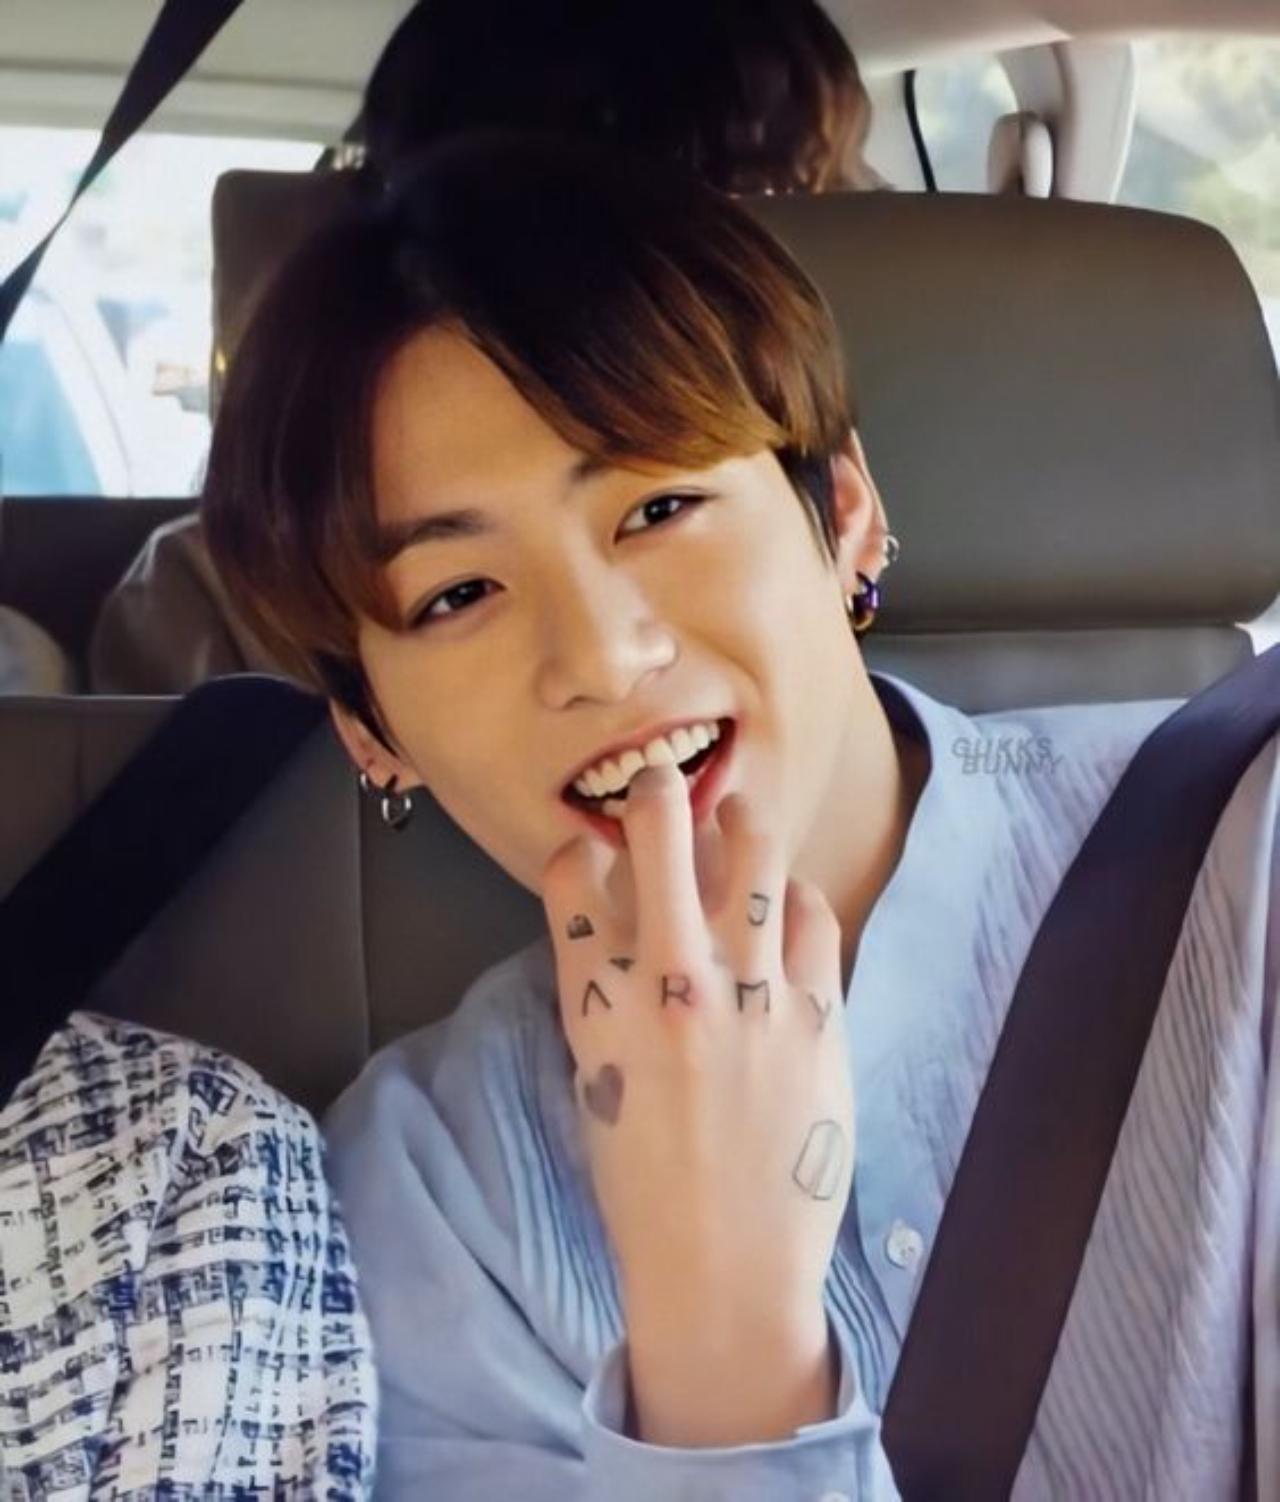 BTS Jungkooks 14 Iconic Tattoos and Their Meanings